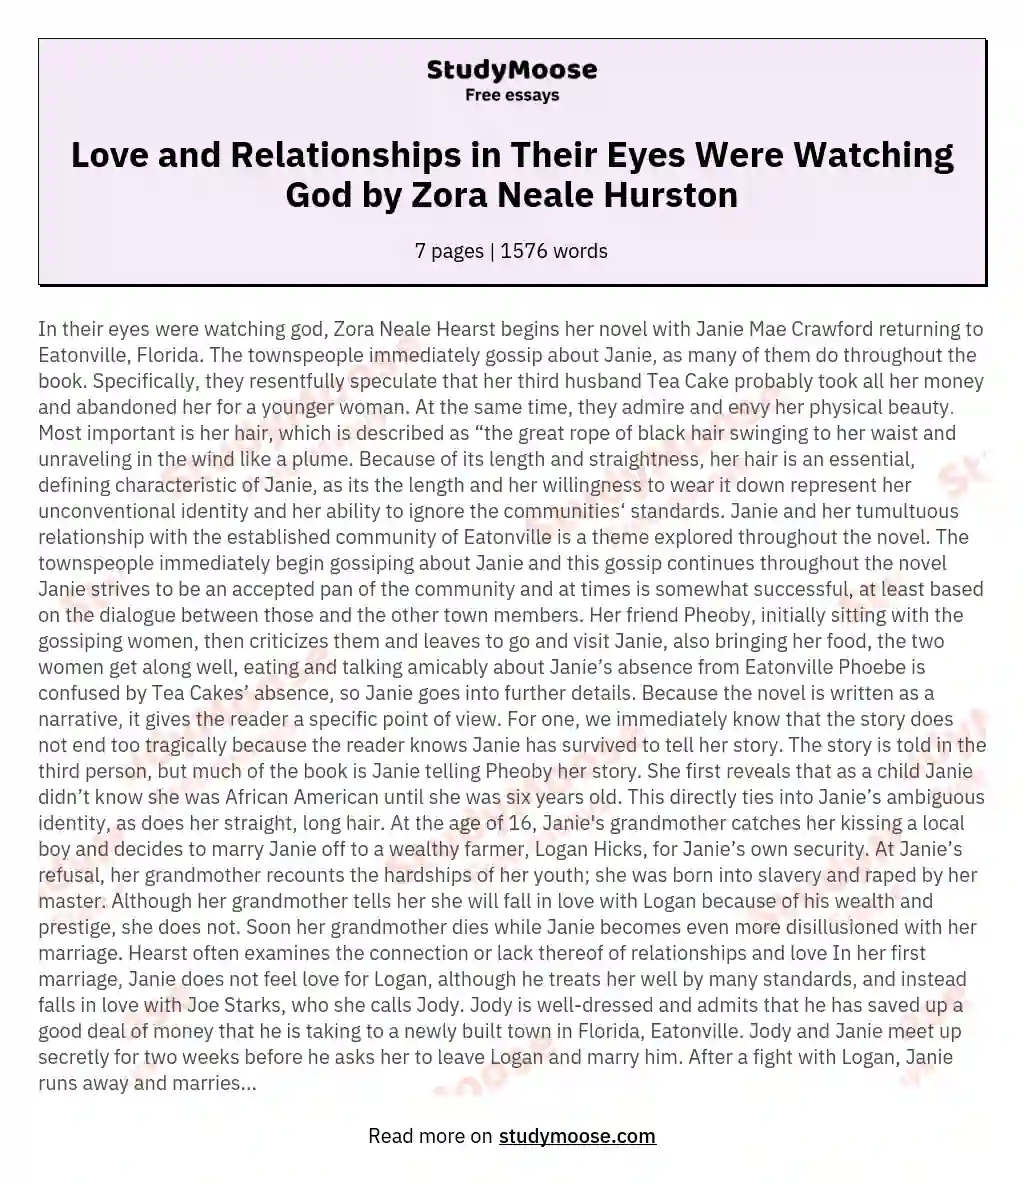 Love and Relationships in Their Eyes Were Watching God by Zora Neale Hurston essay